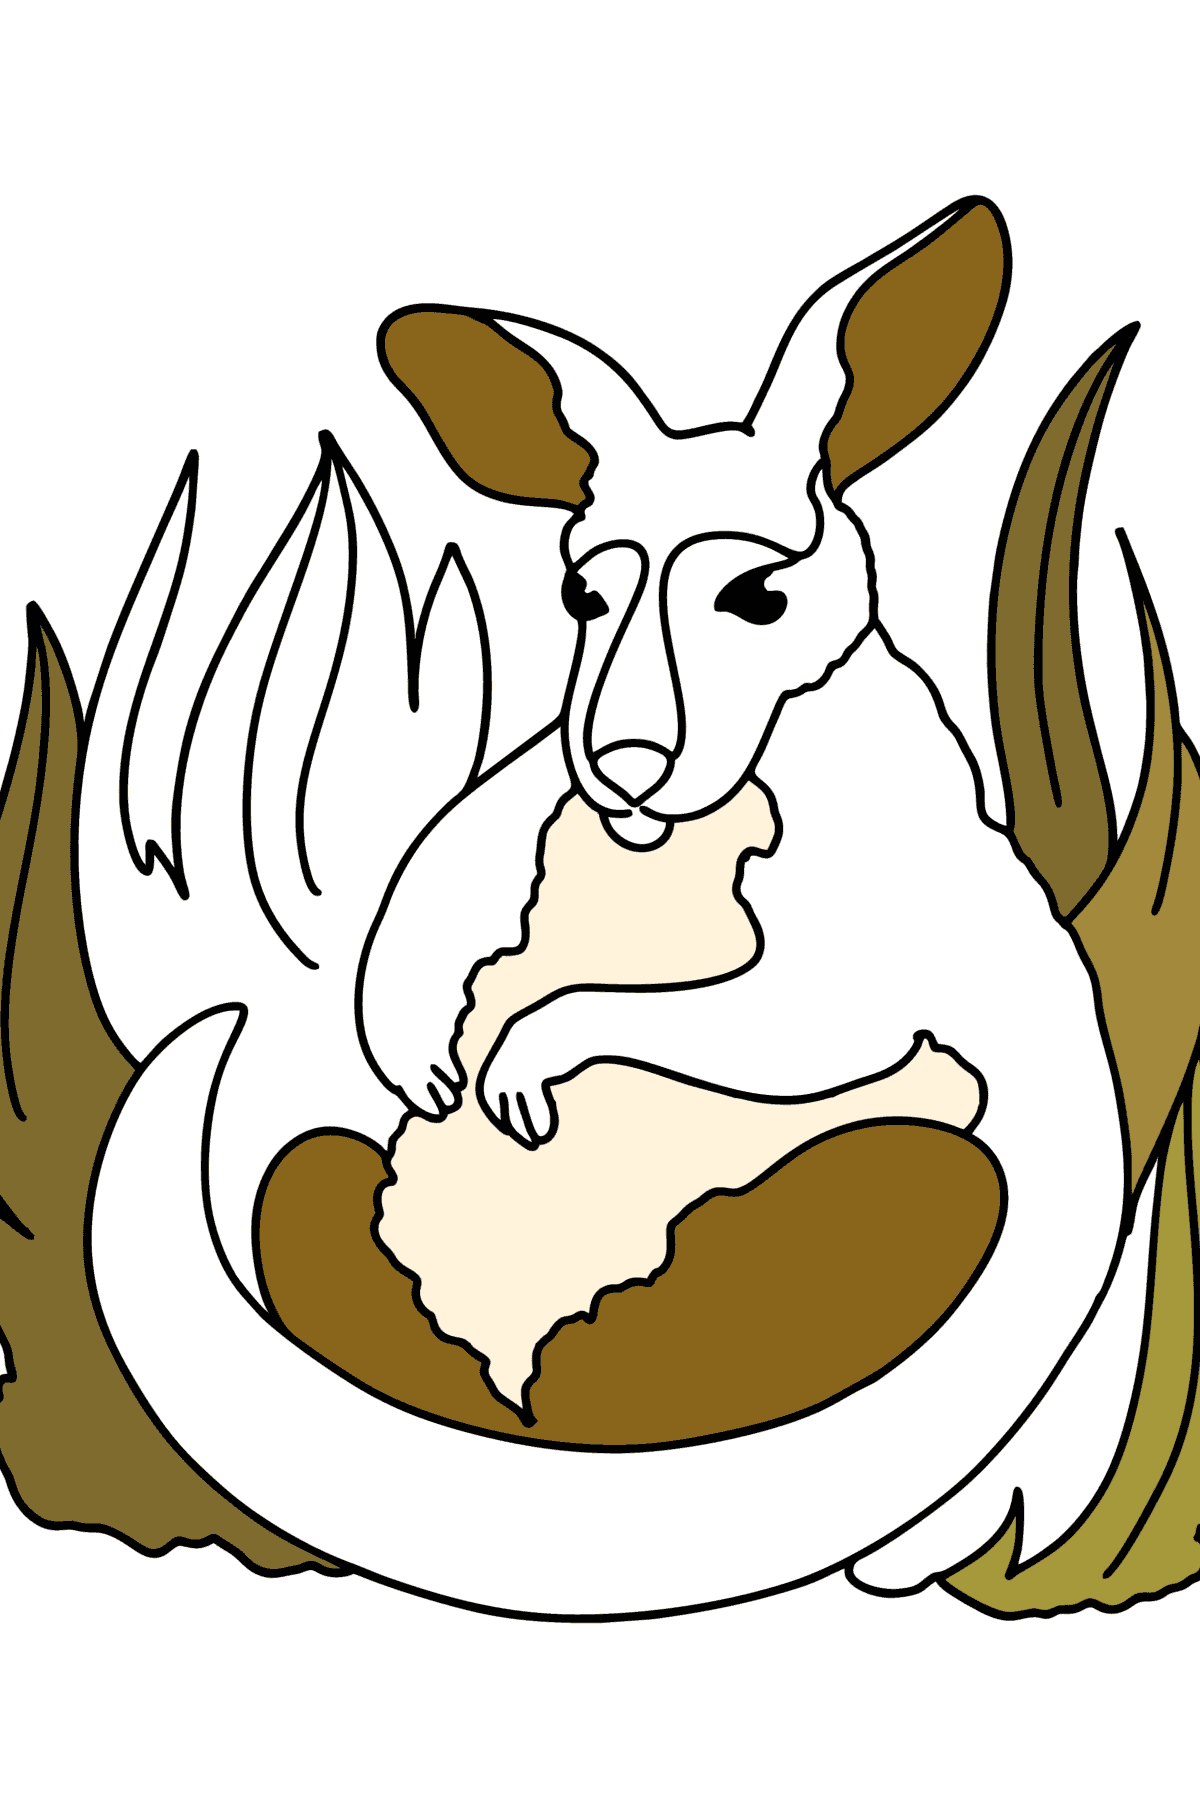 Coloring page - Adorable baby kangaroo - Coloring Pages for Kids